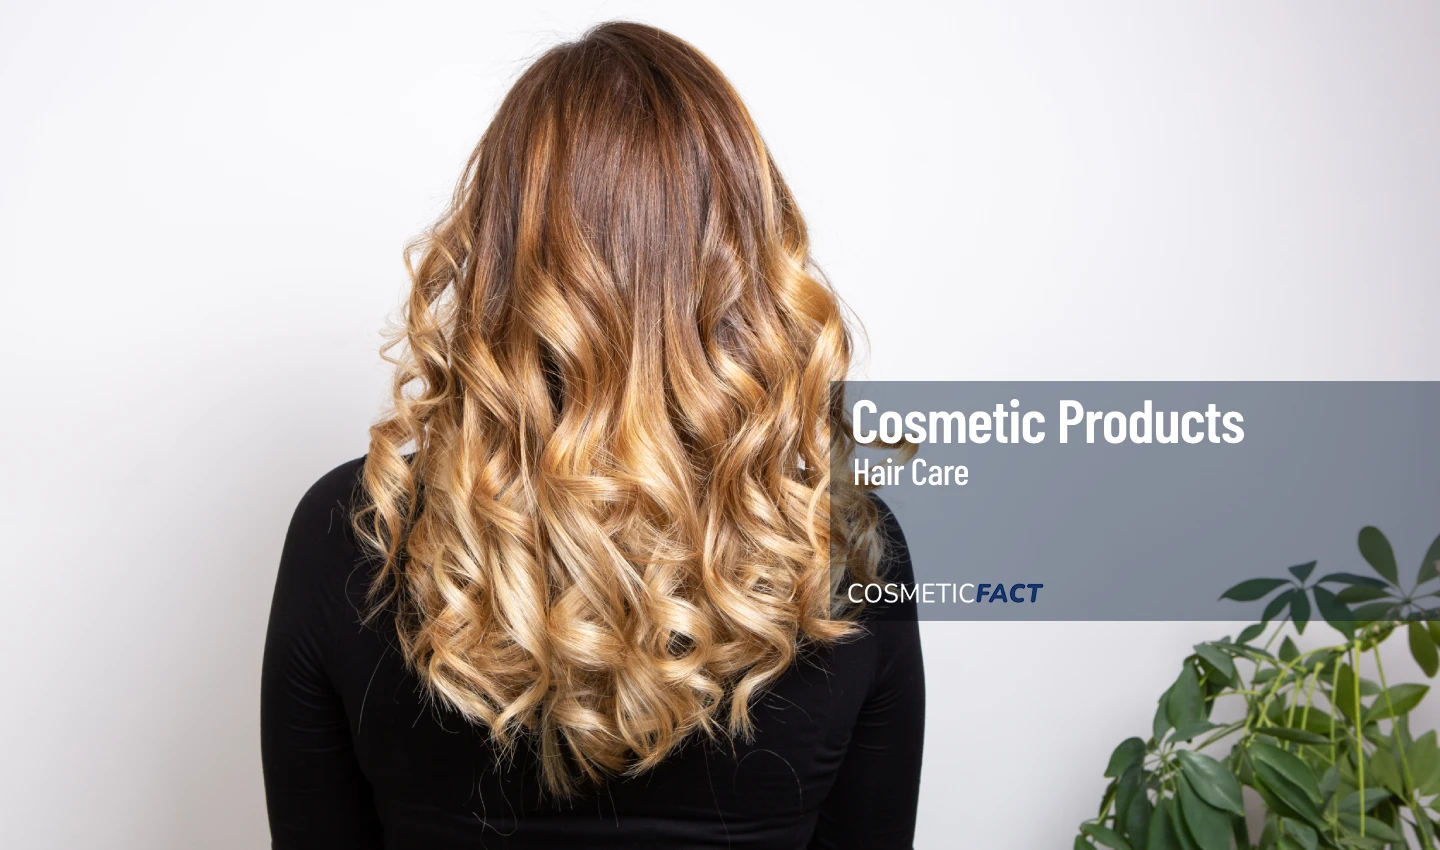 A beautiful woman with long, attractive hair showcases the art of balayage, with subtle highlights that create a glowing effect and enhance her natural beauty. Explore the world of balayage and achieve luminous hair color illumination with our tips and techniques.